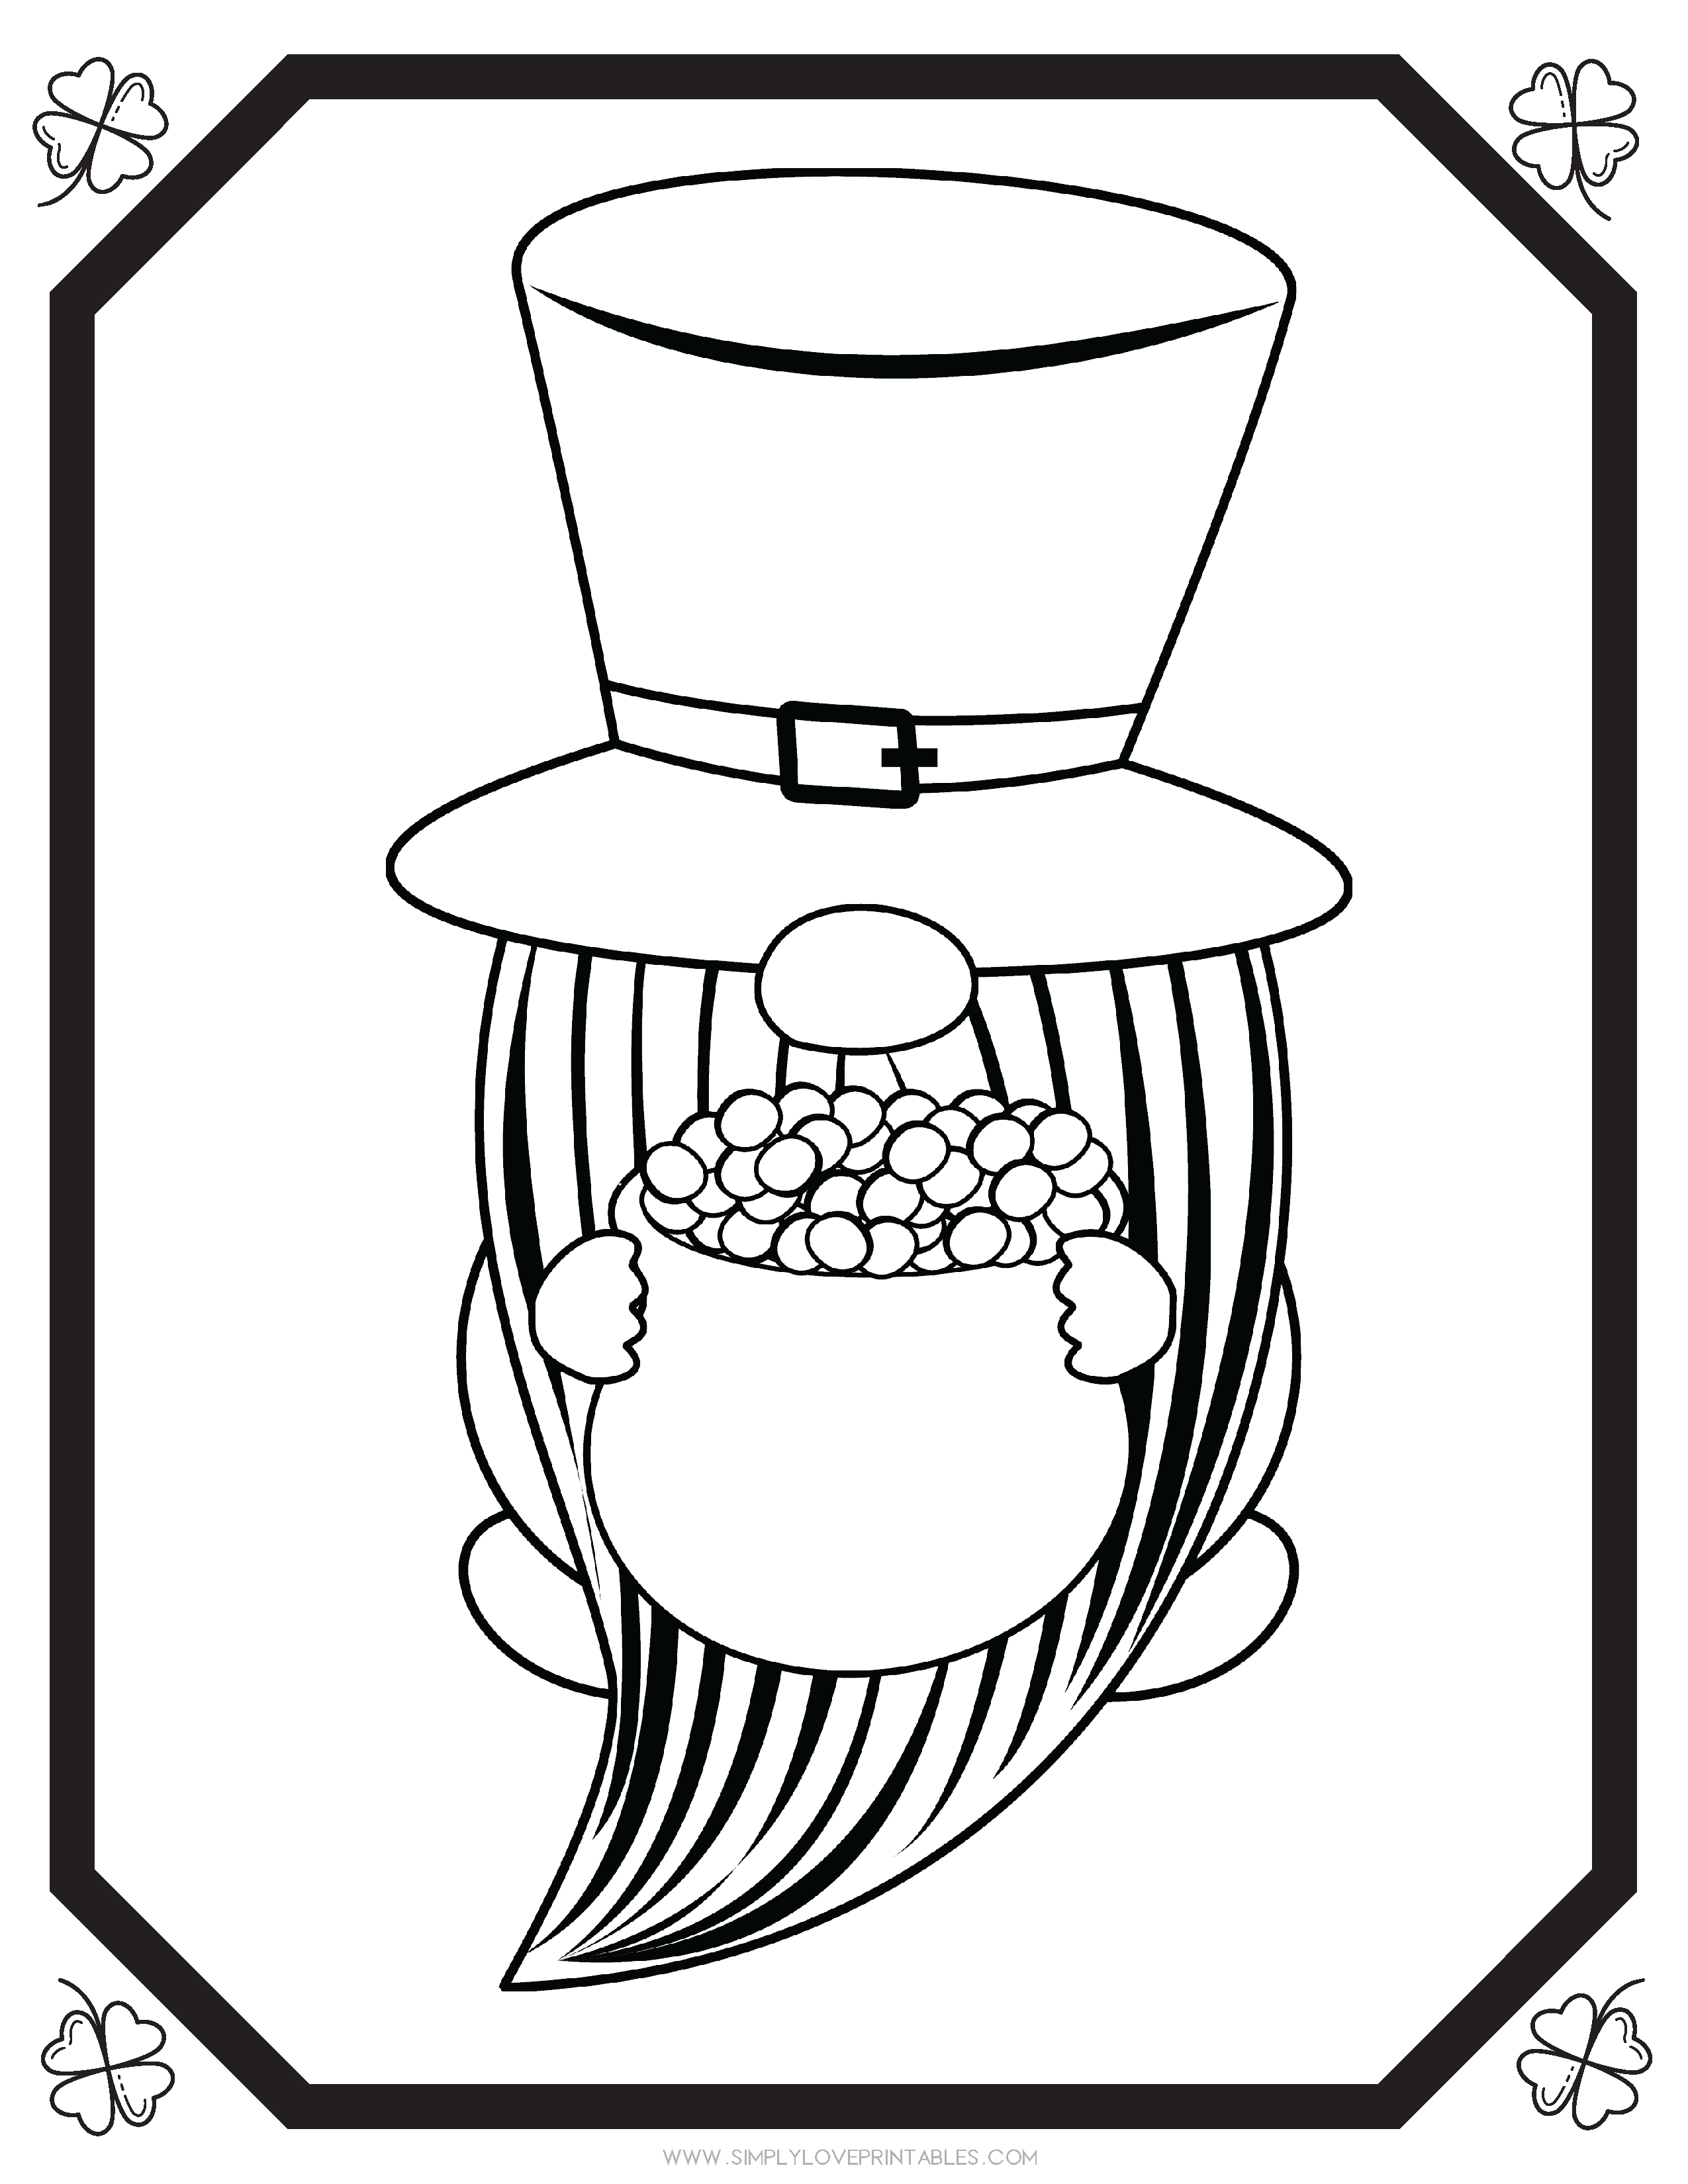 Free st patricks day coloring page printables